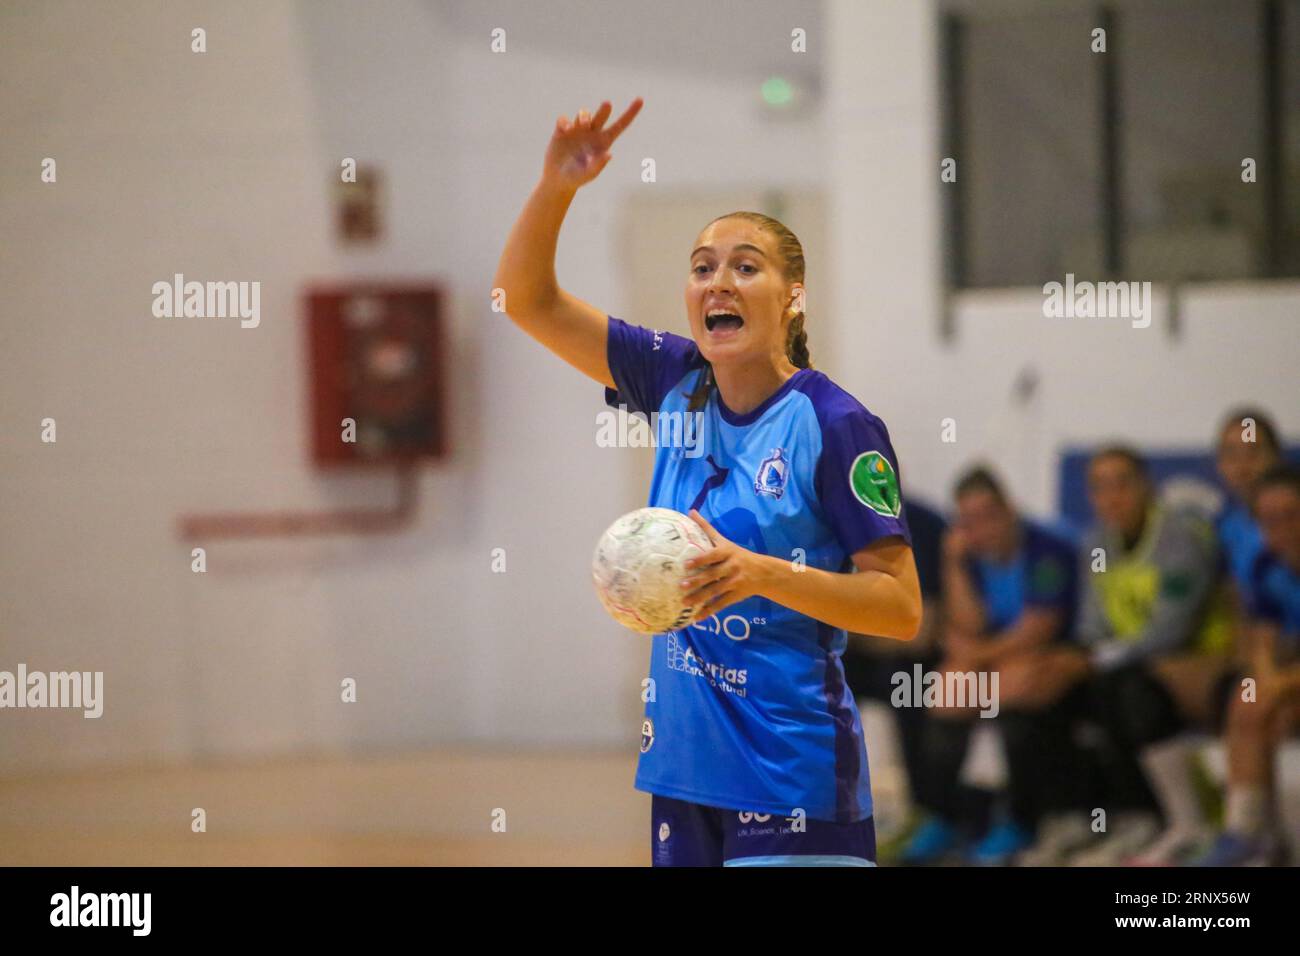 Oviedo, Spain, 02nd September, 2023: The player of Lobas Global Atac Oviedo, Miriam Cortina (7) directing the game during the first day of the Liga Guerreras Iberdrola between Lobas Global Atac Oviedo and Caja Rural Aula Valladolid, on 02 September 2023, at the Florida Arena Municipal Sports Center, in Oviedo, Spain. Credit: Alberto Brevers / Alamy Live News. Stock Photo